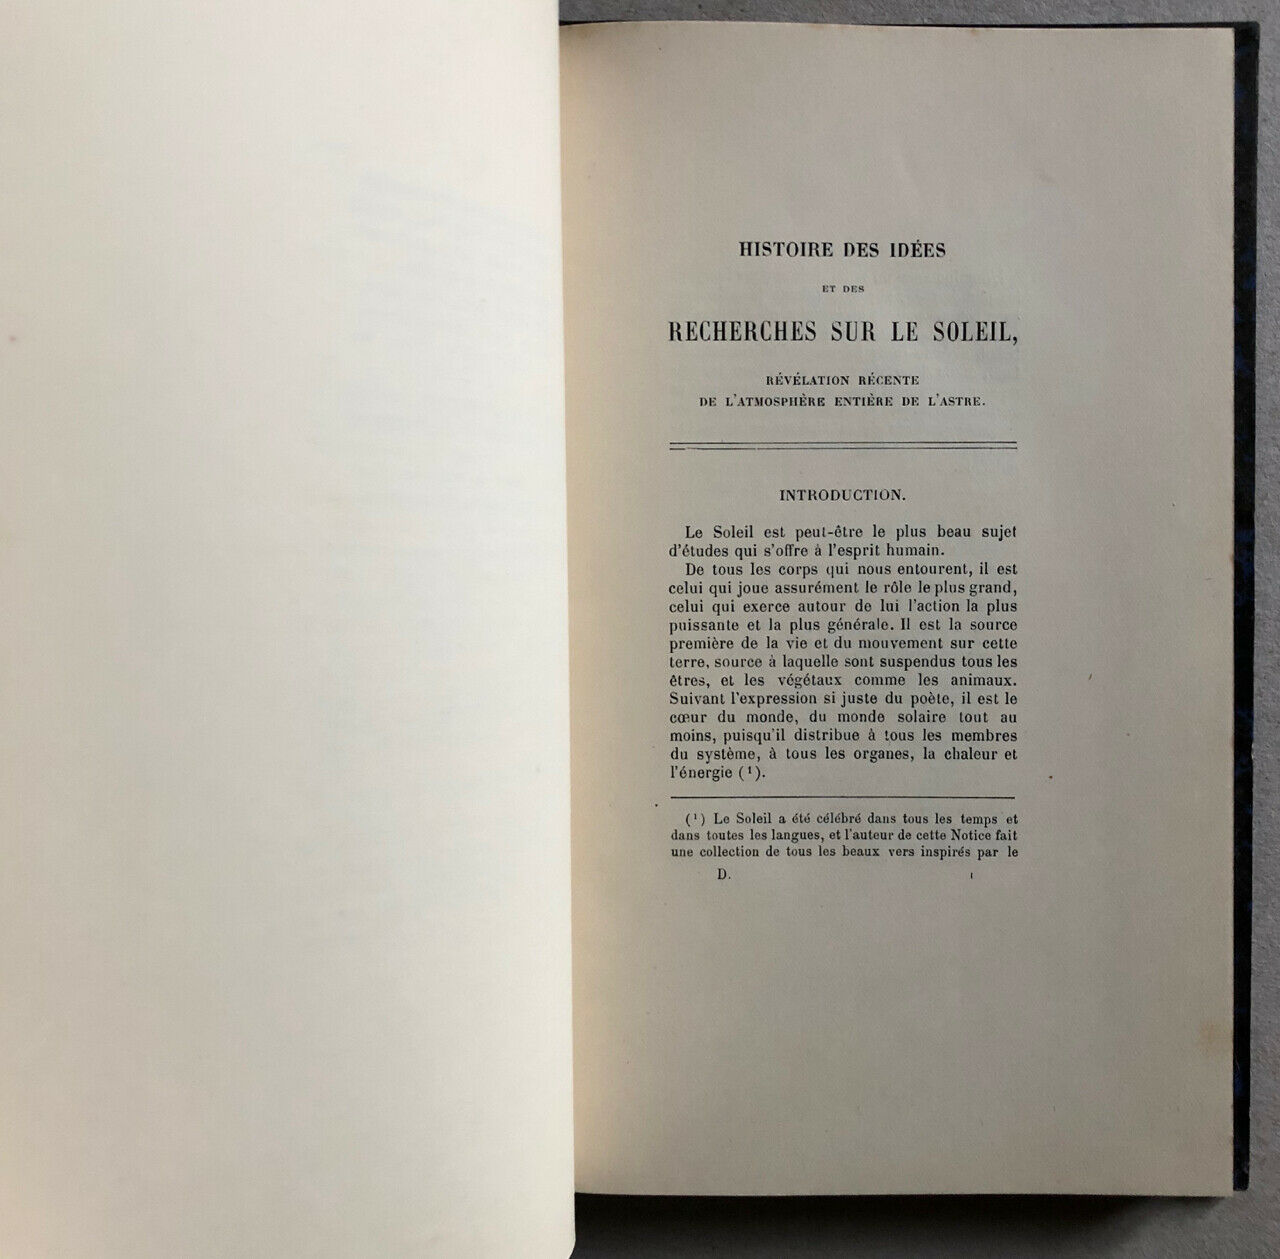 H. Deslandres — History of ideas and research on the Sun — É.O. — 1906